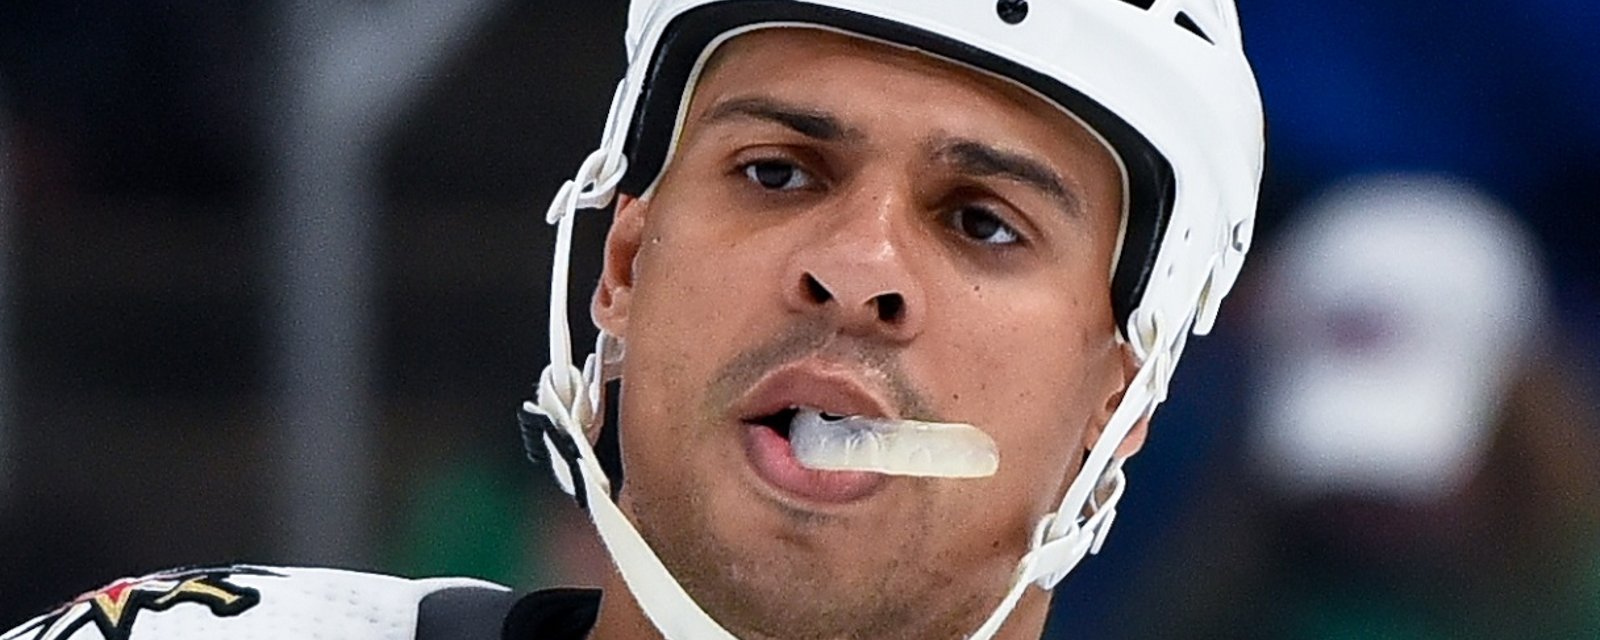 NHL Player Safety has suspended Ryan Reaves.